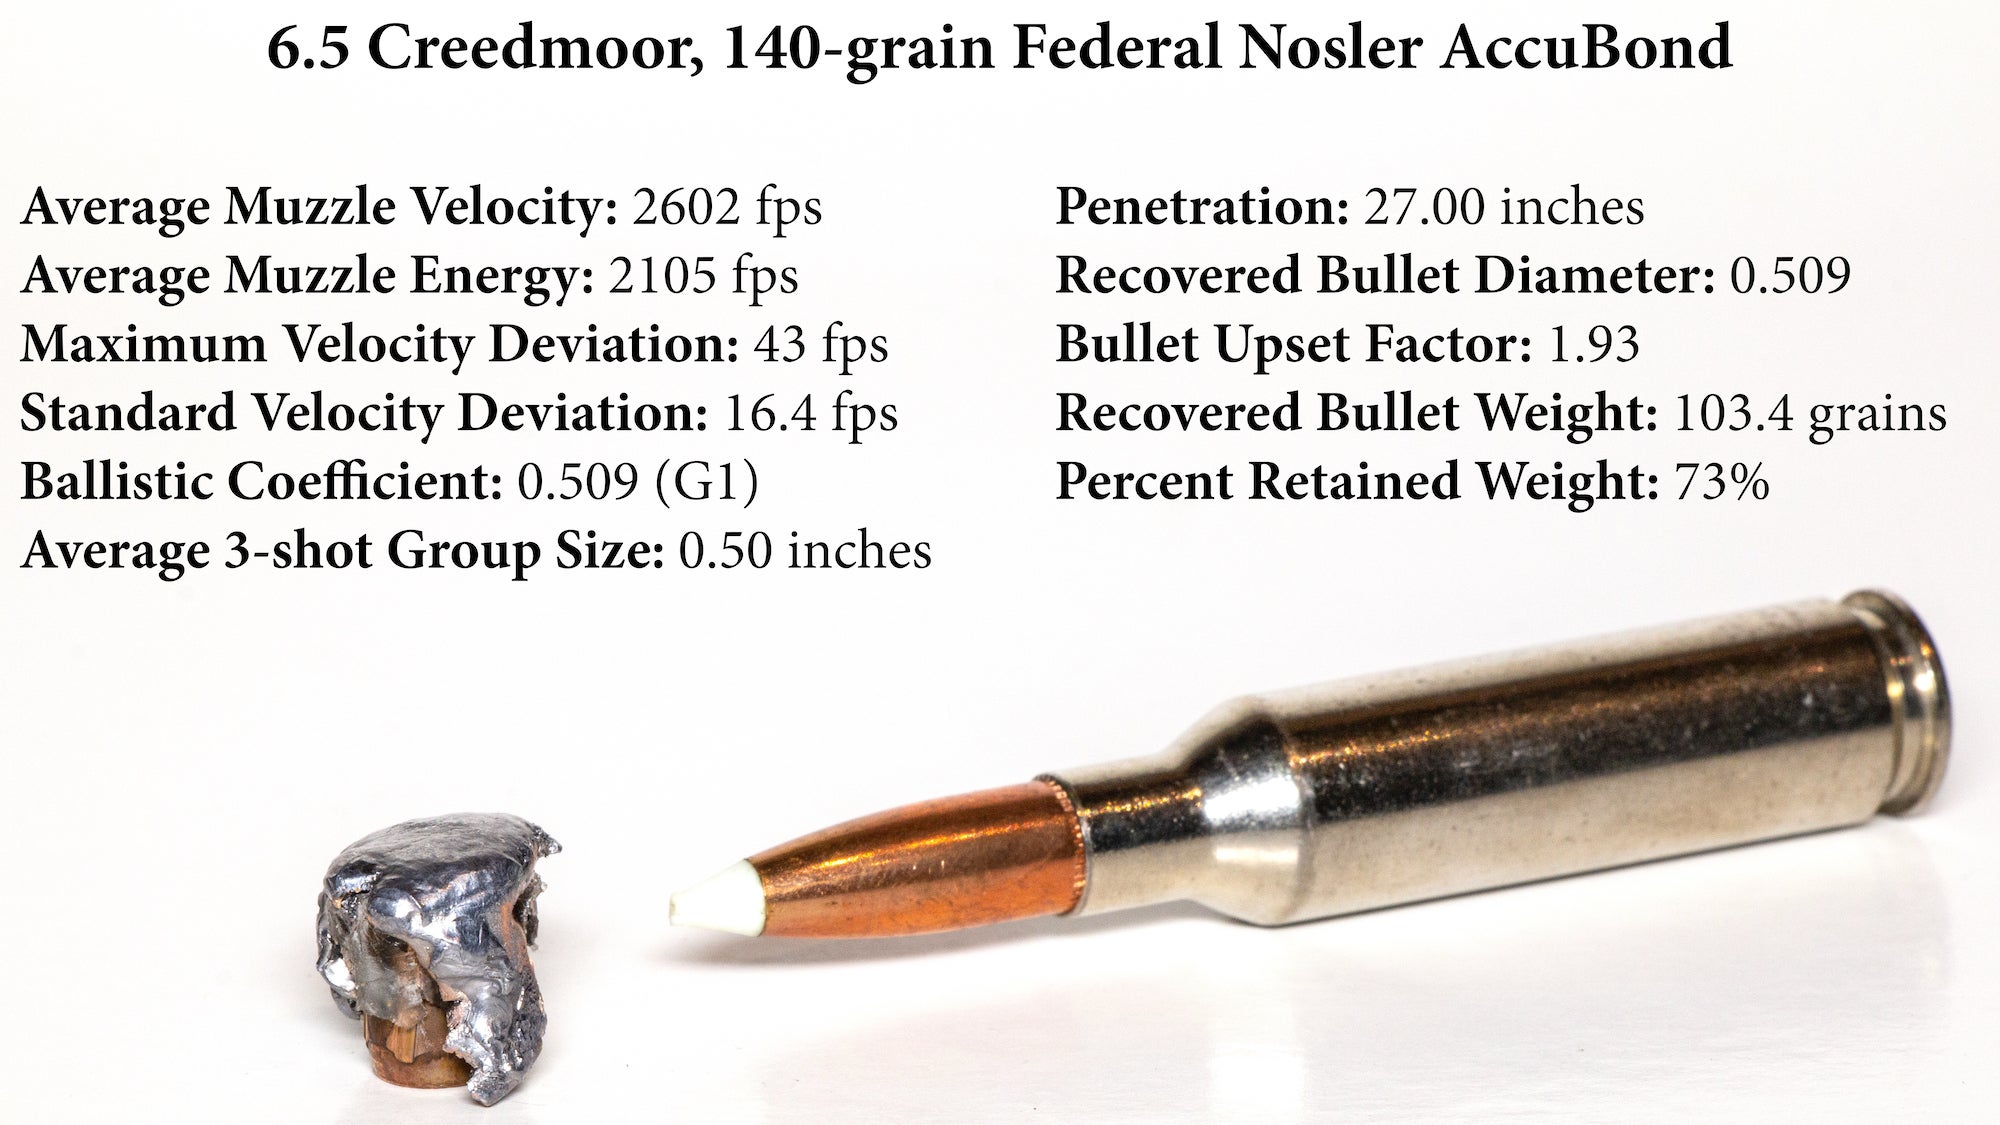 Chart showing test results for Federal 140-grain Nosler AccuBond 6.5 Creedmoor load.